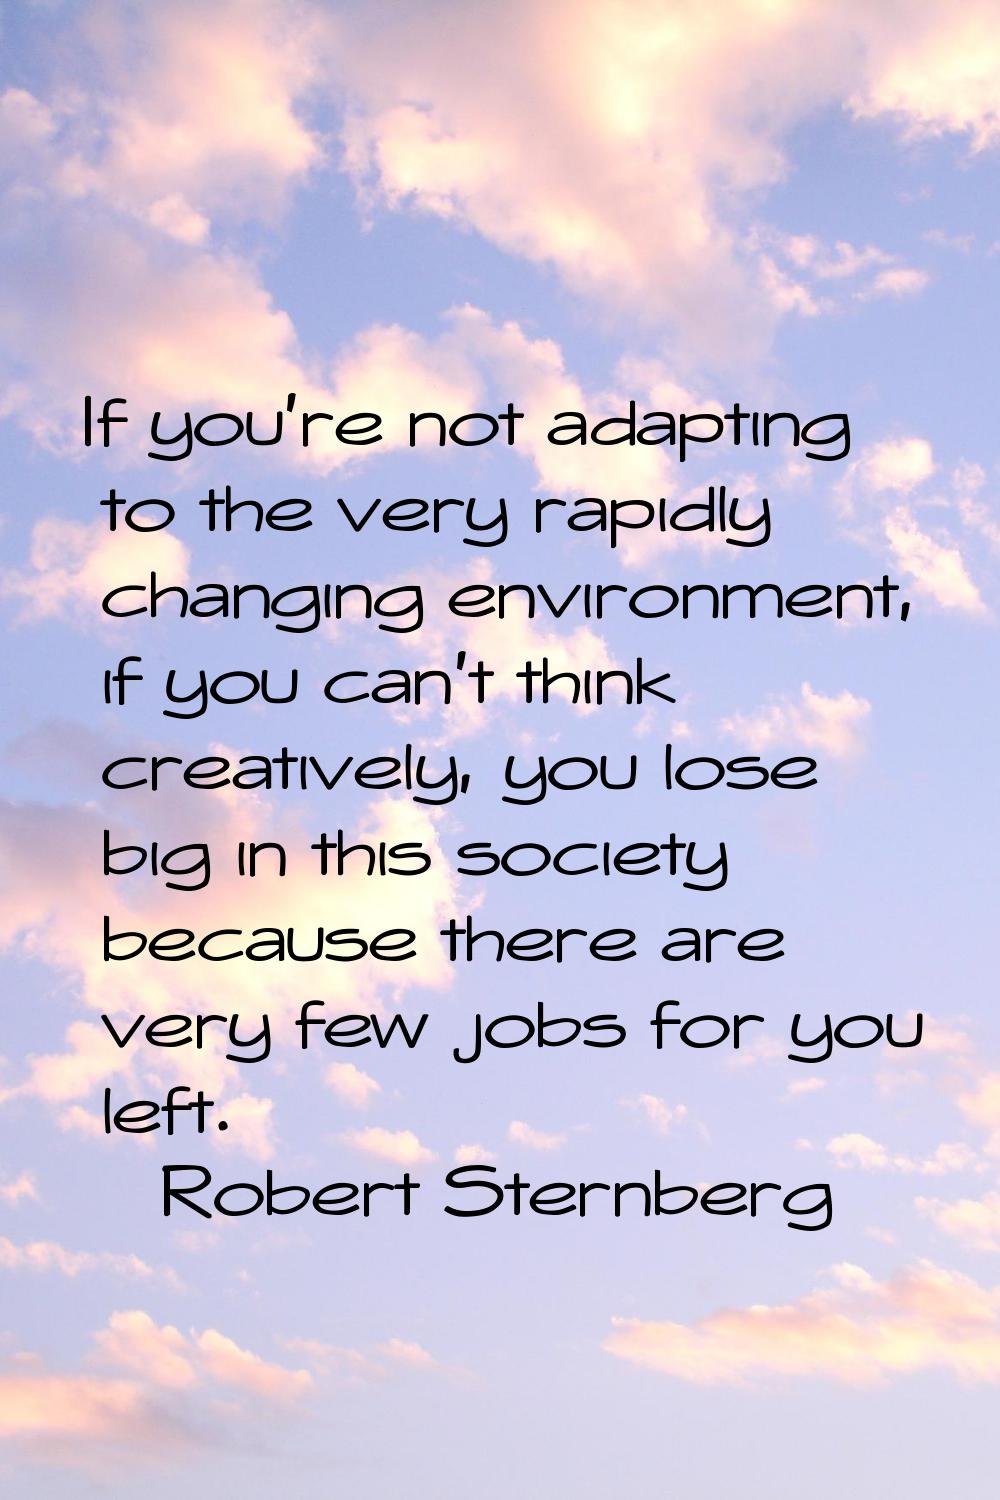 If you're not adapting to the very rapidly changing environment, if you can't think creatively, you